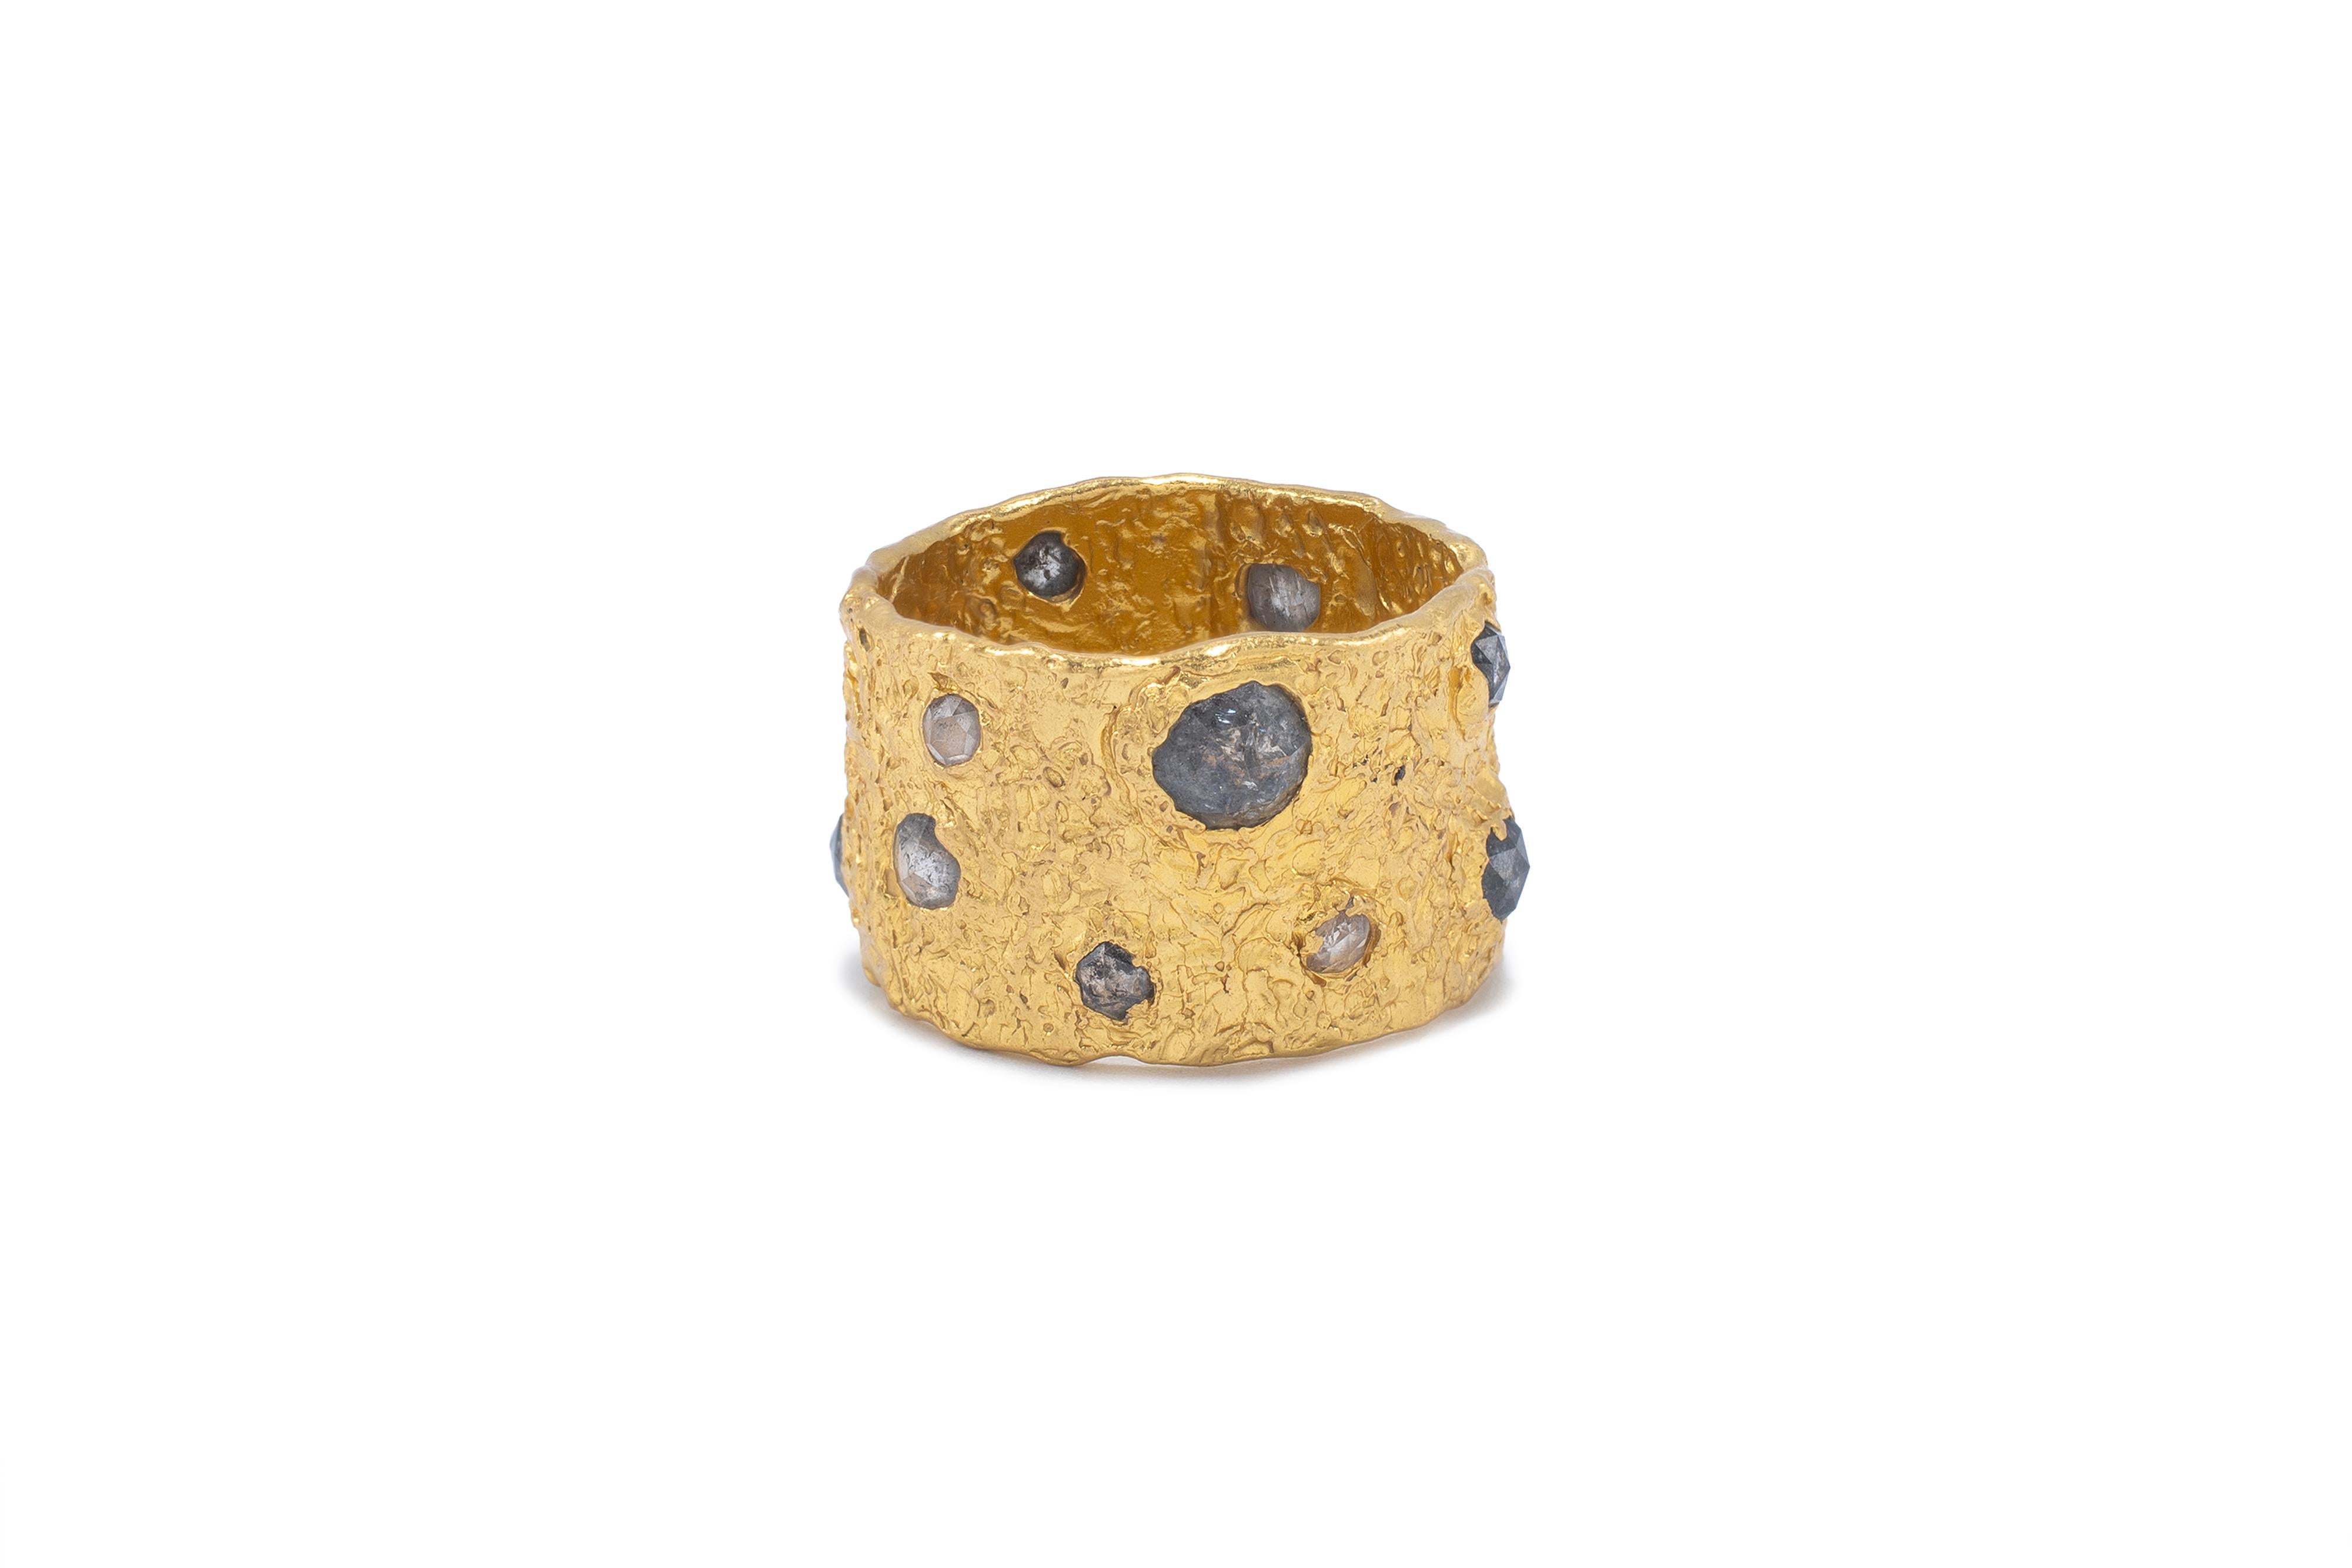 Artemis Salt and Pepper Diamond Ring in 22k Gold, by Tagili In New Condition For Sale In New York, NY